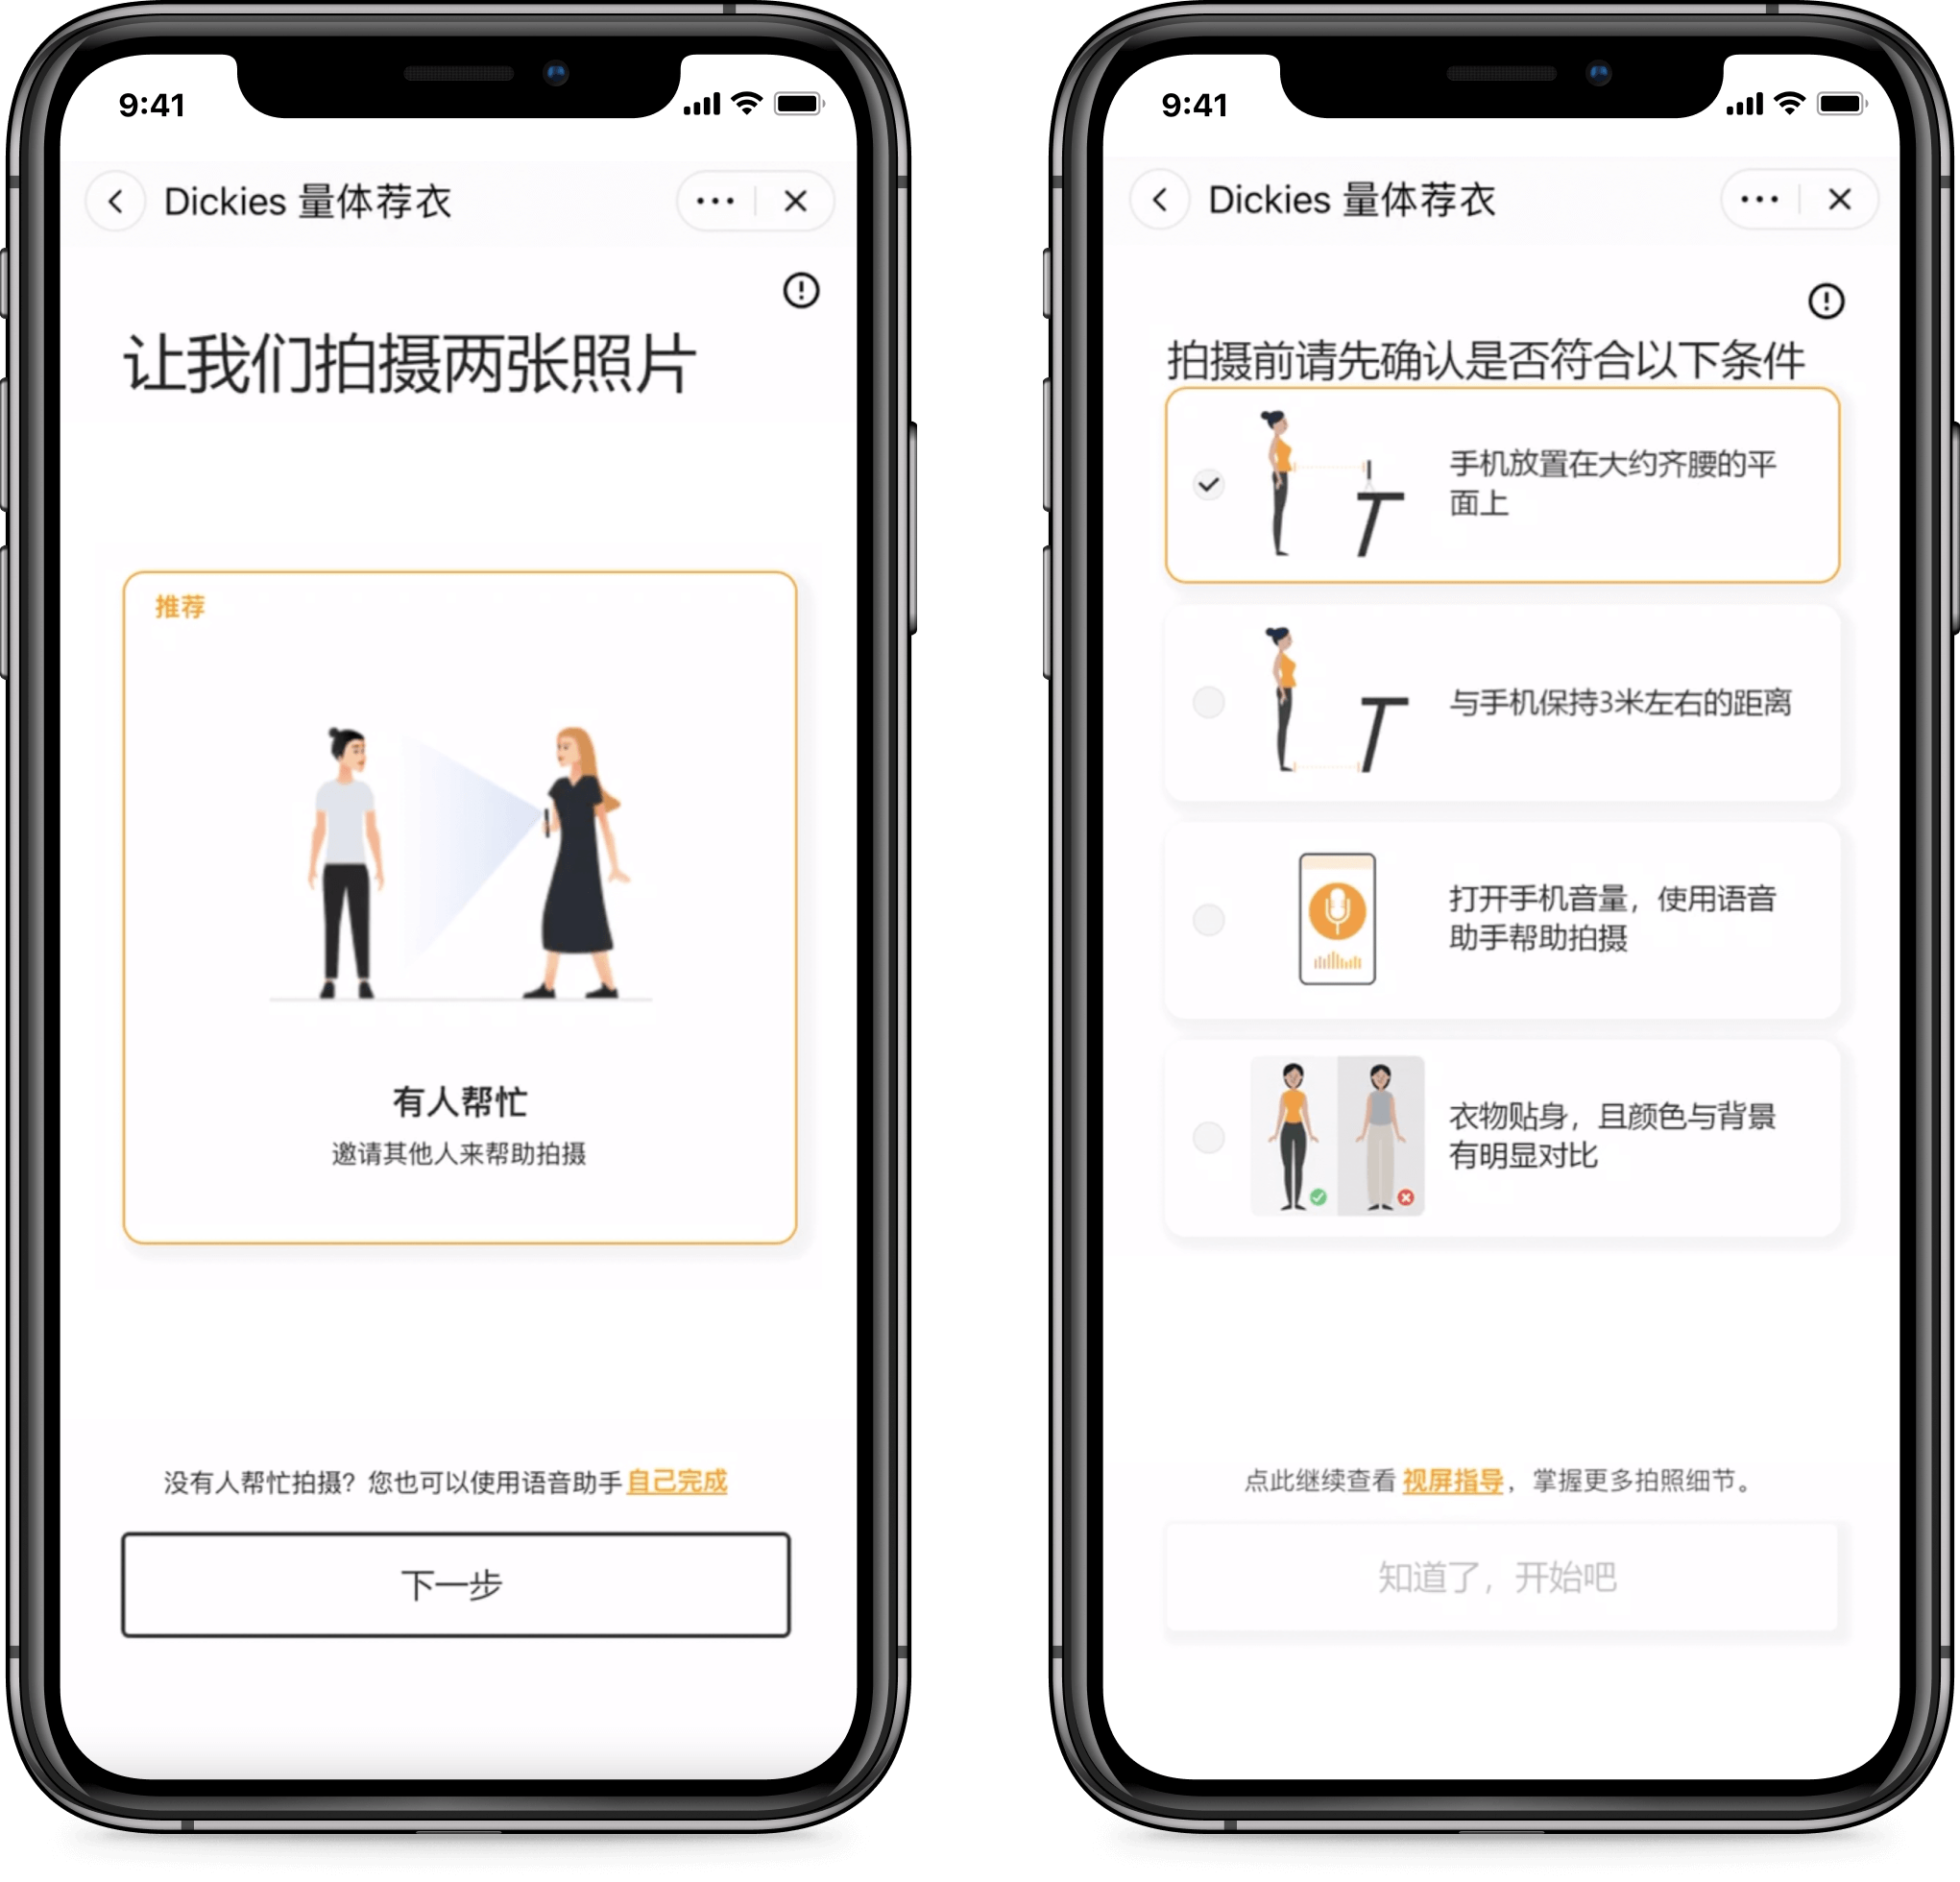 Two smartphone screens display instructions for taking photos to fit clothing. The left screen shows a guide on taking photos, while the right screen lists necessary conditions before capturing photos for a personalized fitting experience using 3DLOOK technology.